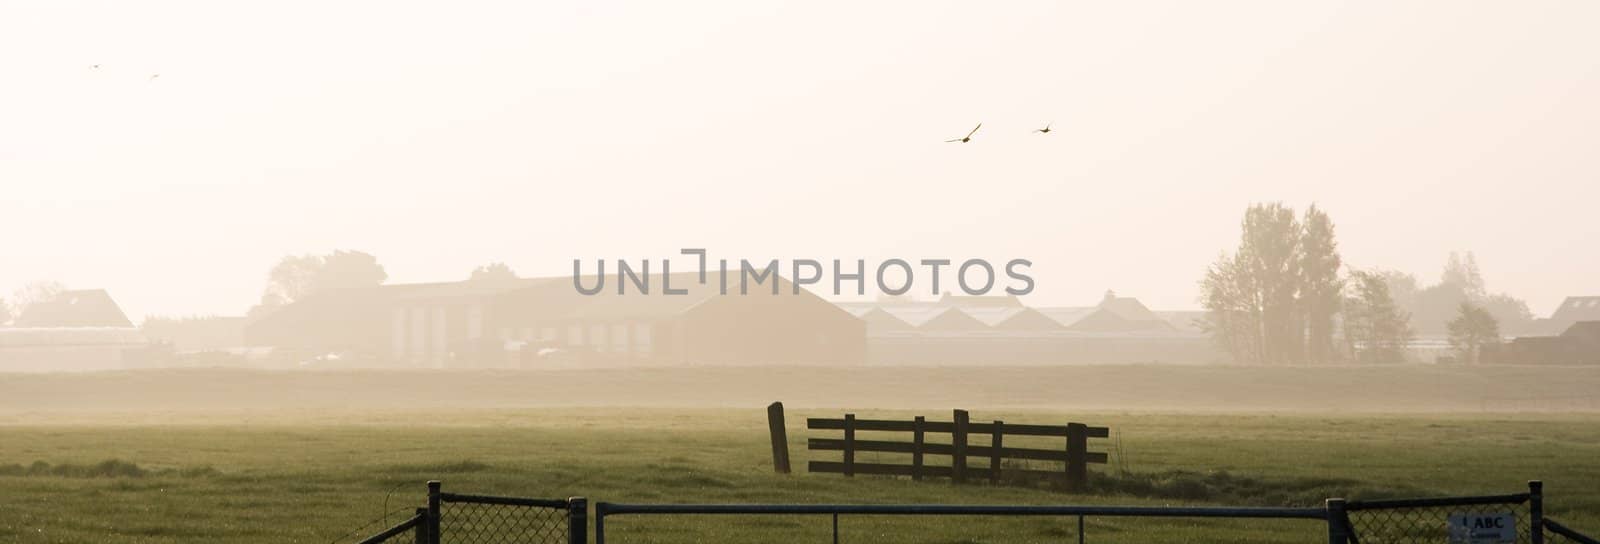 Company with glasshouses in farmland with fences on the foreground just after misty sunrise